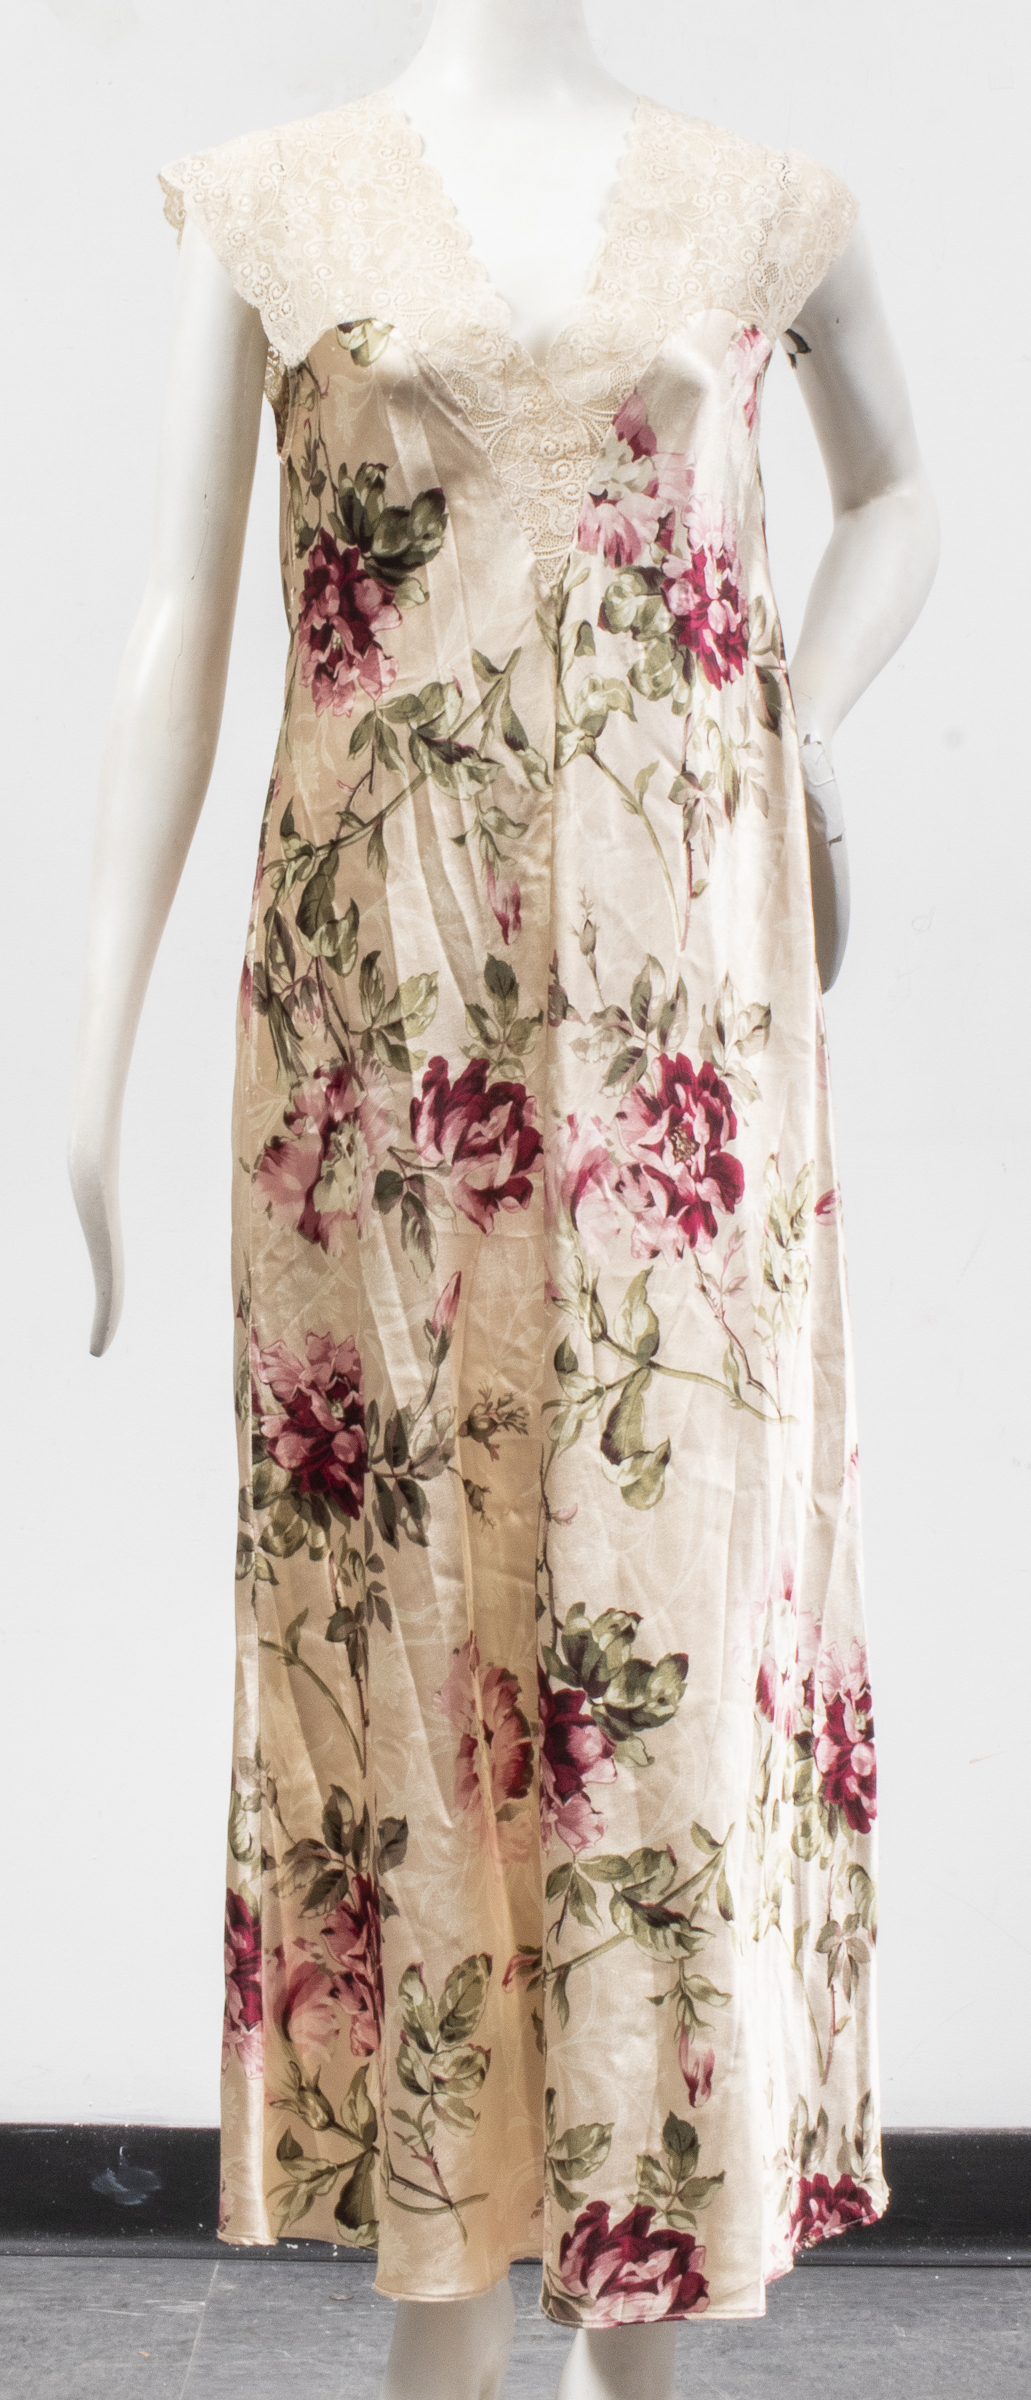 VALENTINO INTIMO FLORAL NIGHTGOWN 3c4100